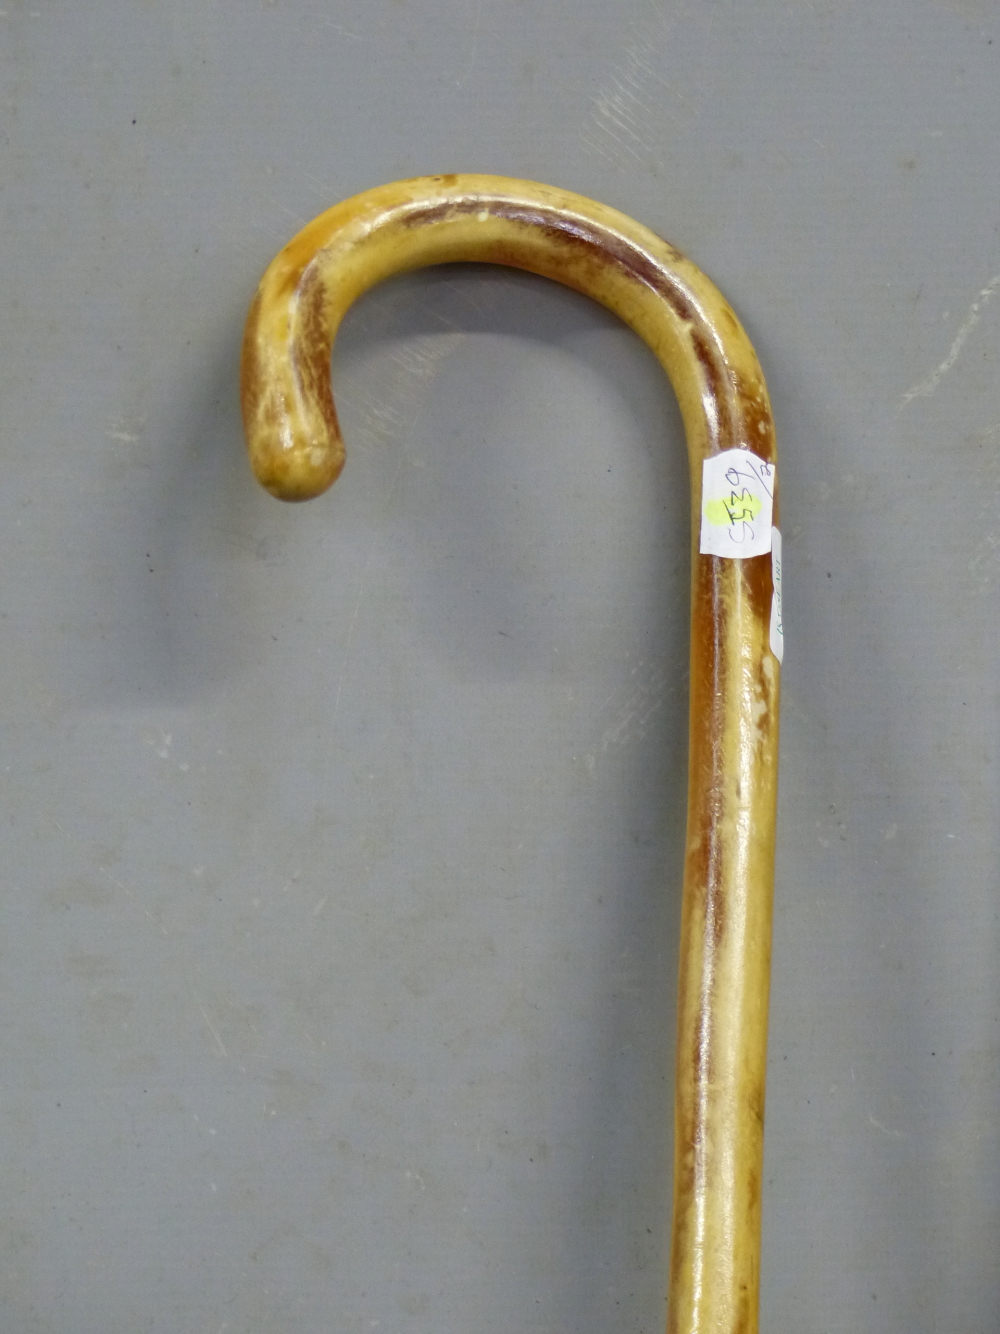 A HORN WALKING STICK OF AMBER HUE TOGETHER WITH A WALKING CANE FORMED OF HORN IN BANDS OF COLOURS - Image 6 of 9